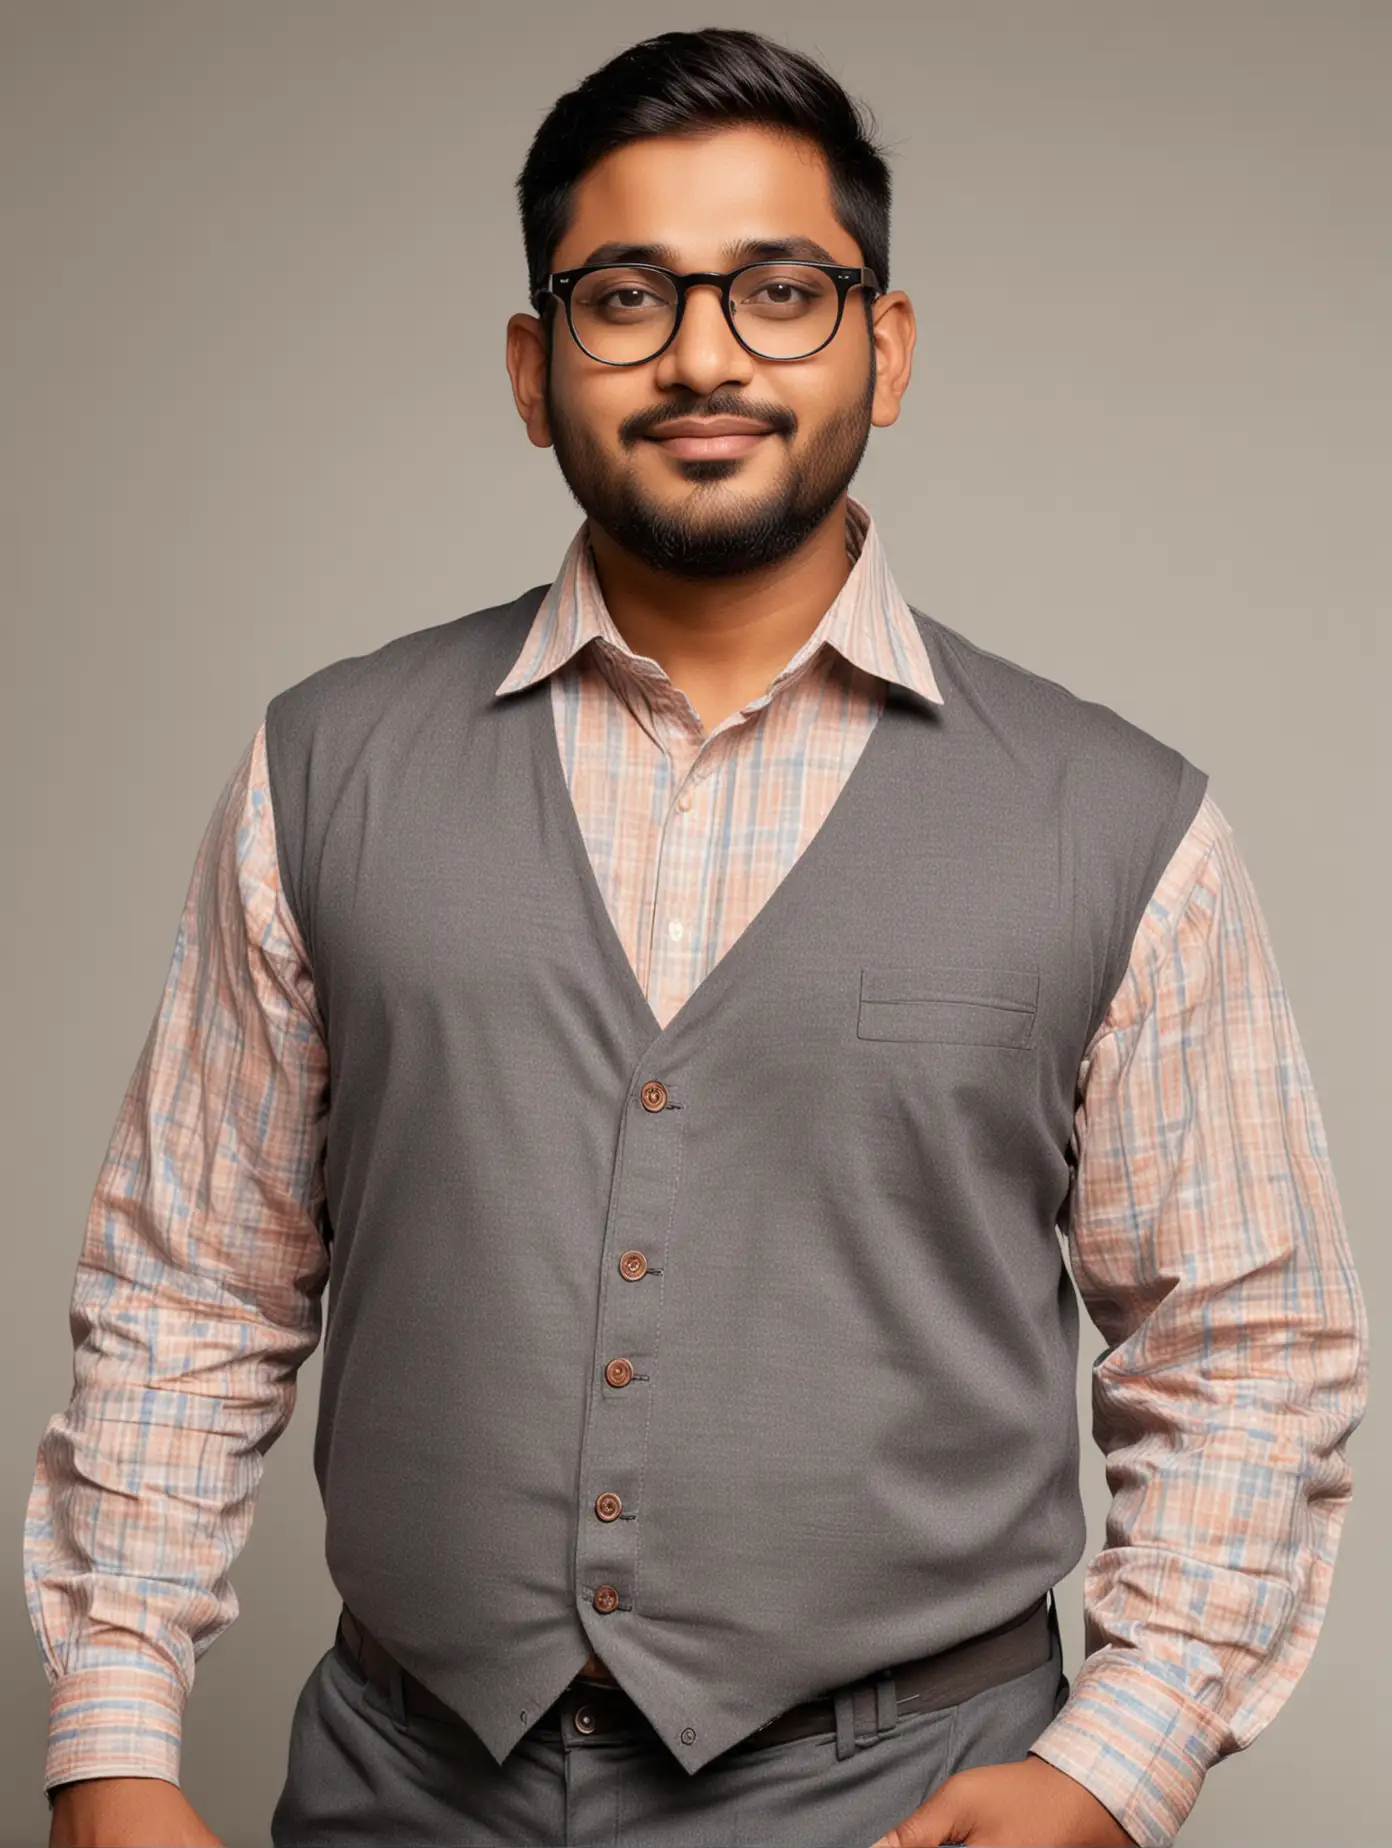 An Indian wearing spectacles with broad shoulders and fat body (kinda like dad body)